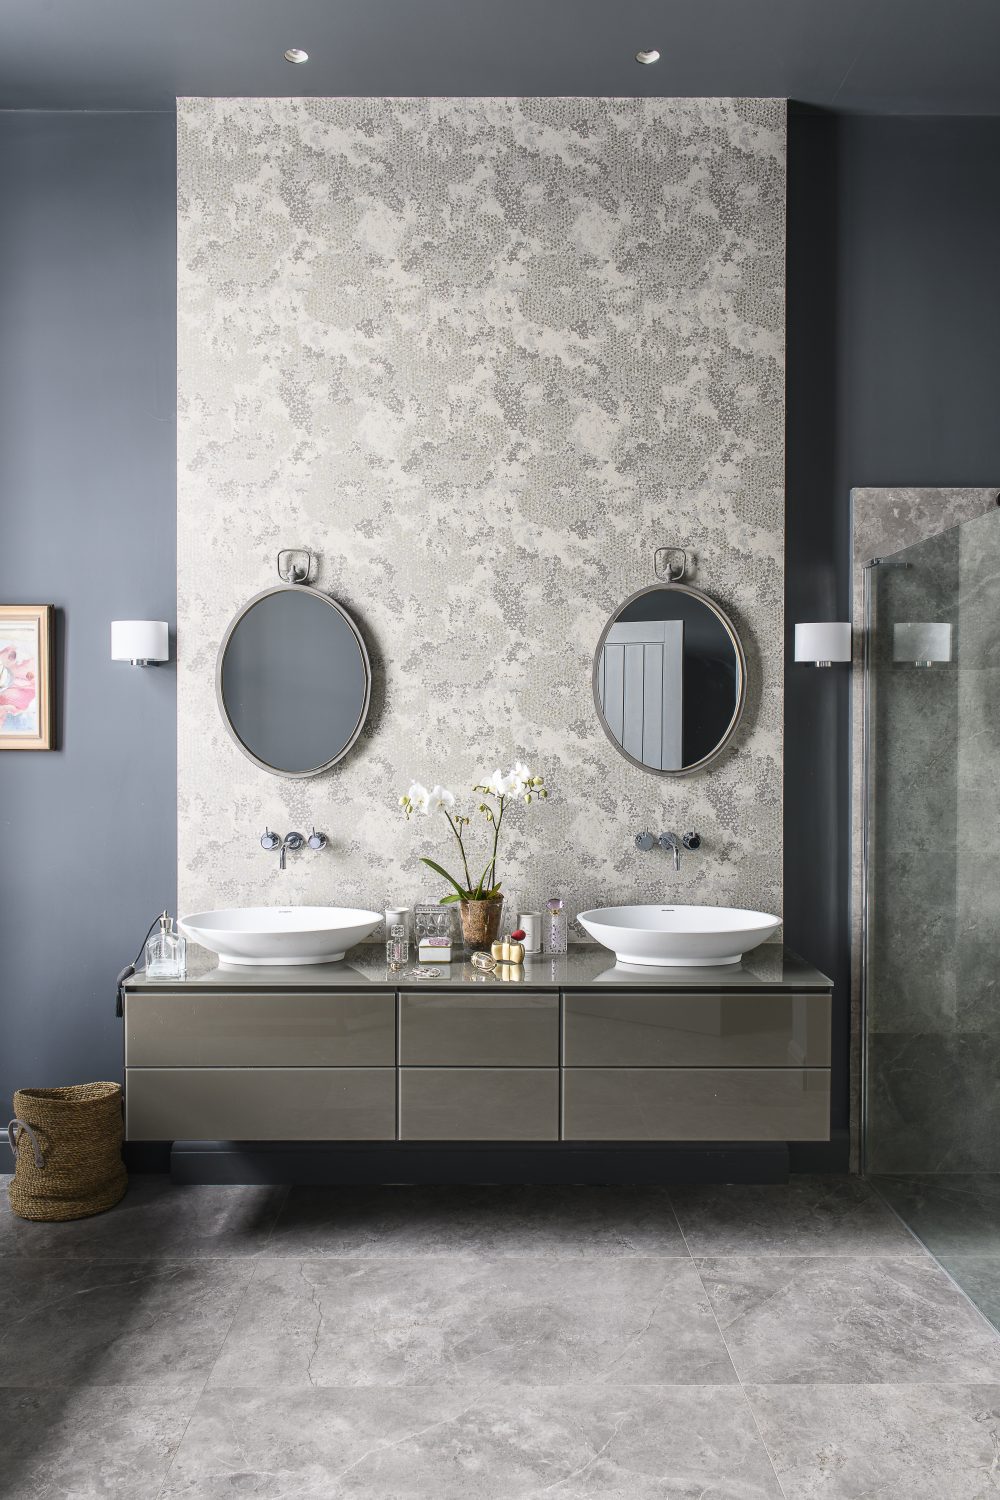 A luxurious, sculptural bath from C P Hart in Tunbridge Wells reclines next to the curtain-less window in the bathroom. The walls are painted in Scree by Little Greene, with wallpaper by Designers Guild